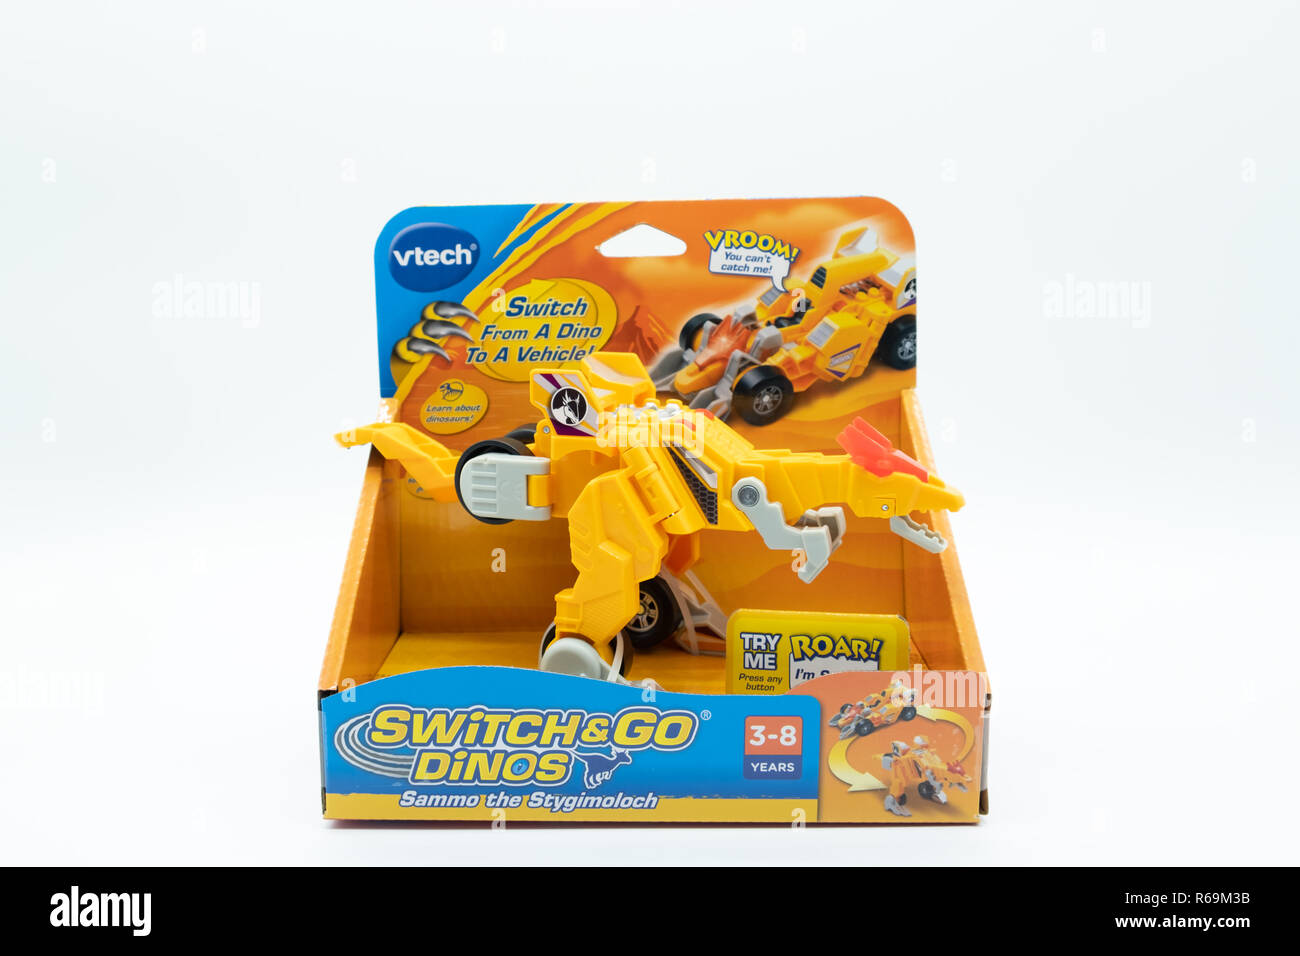 Largs, Scotland, UK - November 29, 2018: Vtech Branded Switch & Go Dinos Children's Plastic Toy boxed in partially recyclable packaging in line with c Stock Photo